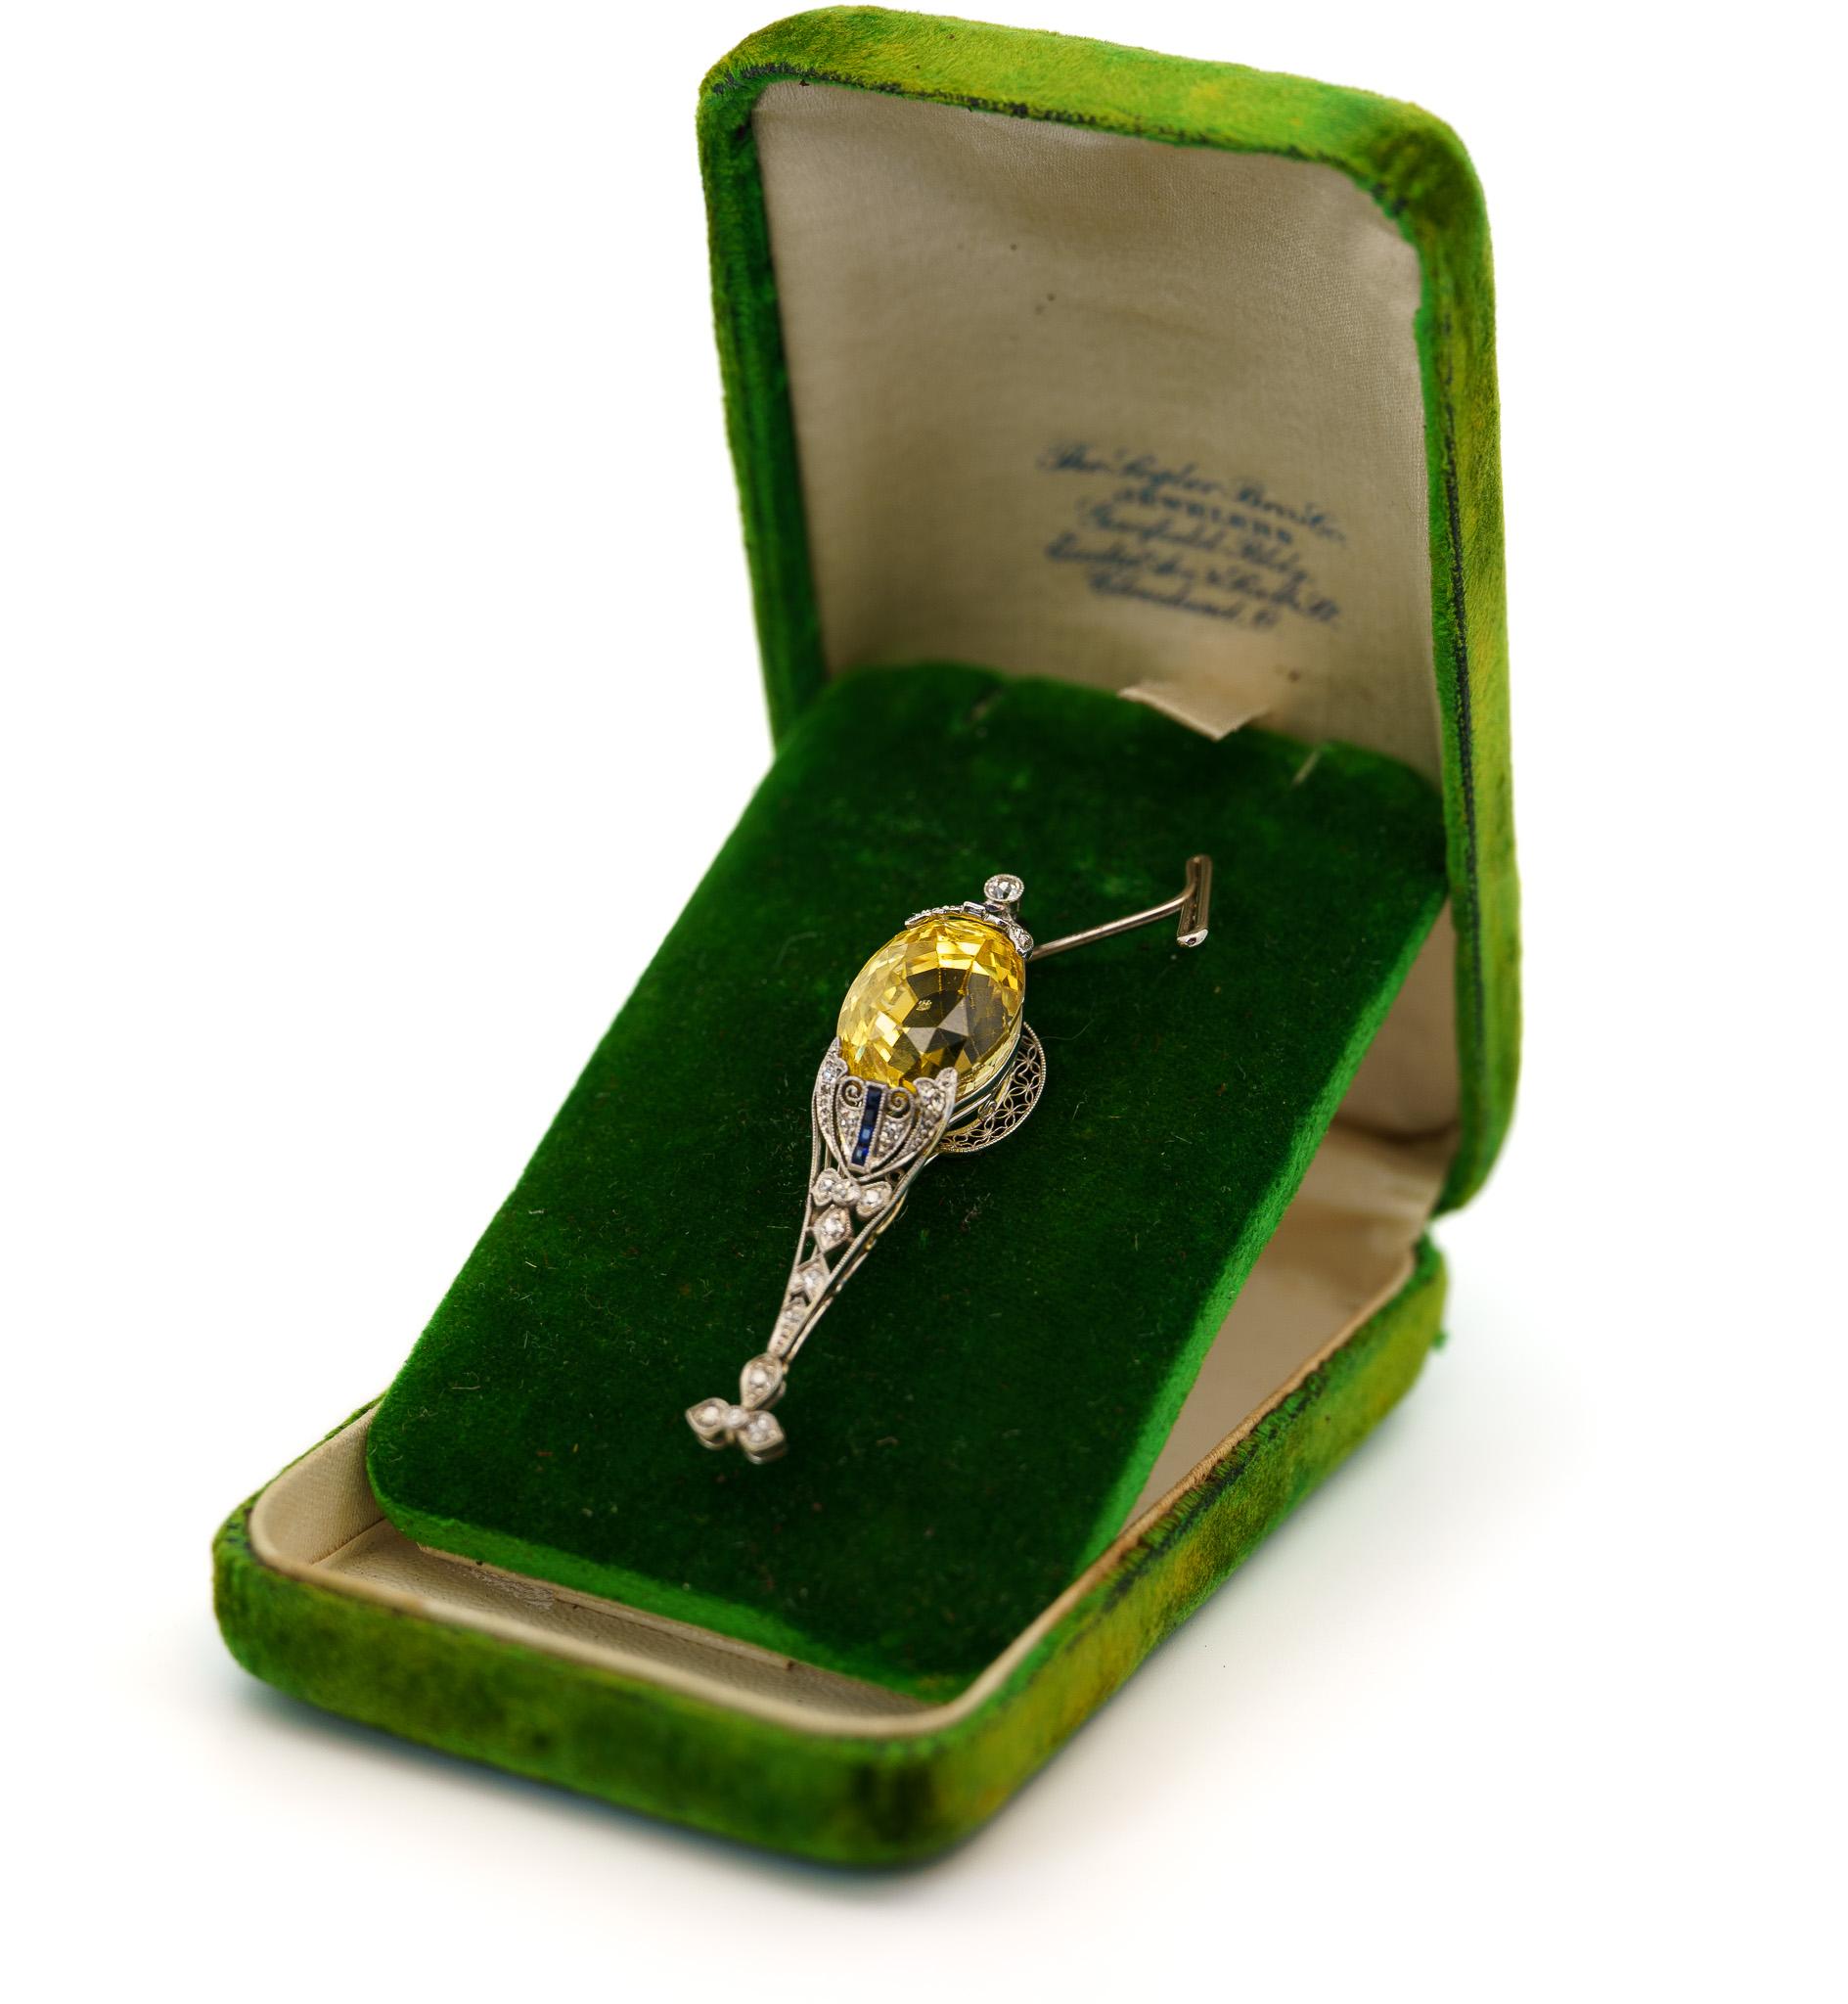 Antique Art Deco Era Platinum, Yellow Sapphire, and Diamond Pendant. 

This antique art deco pendant features a, non-heated Ceylon yellow sapphire. Non-heated yellow sapphires are scarce. There has been no modification to the color or appearance of